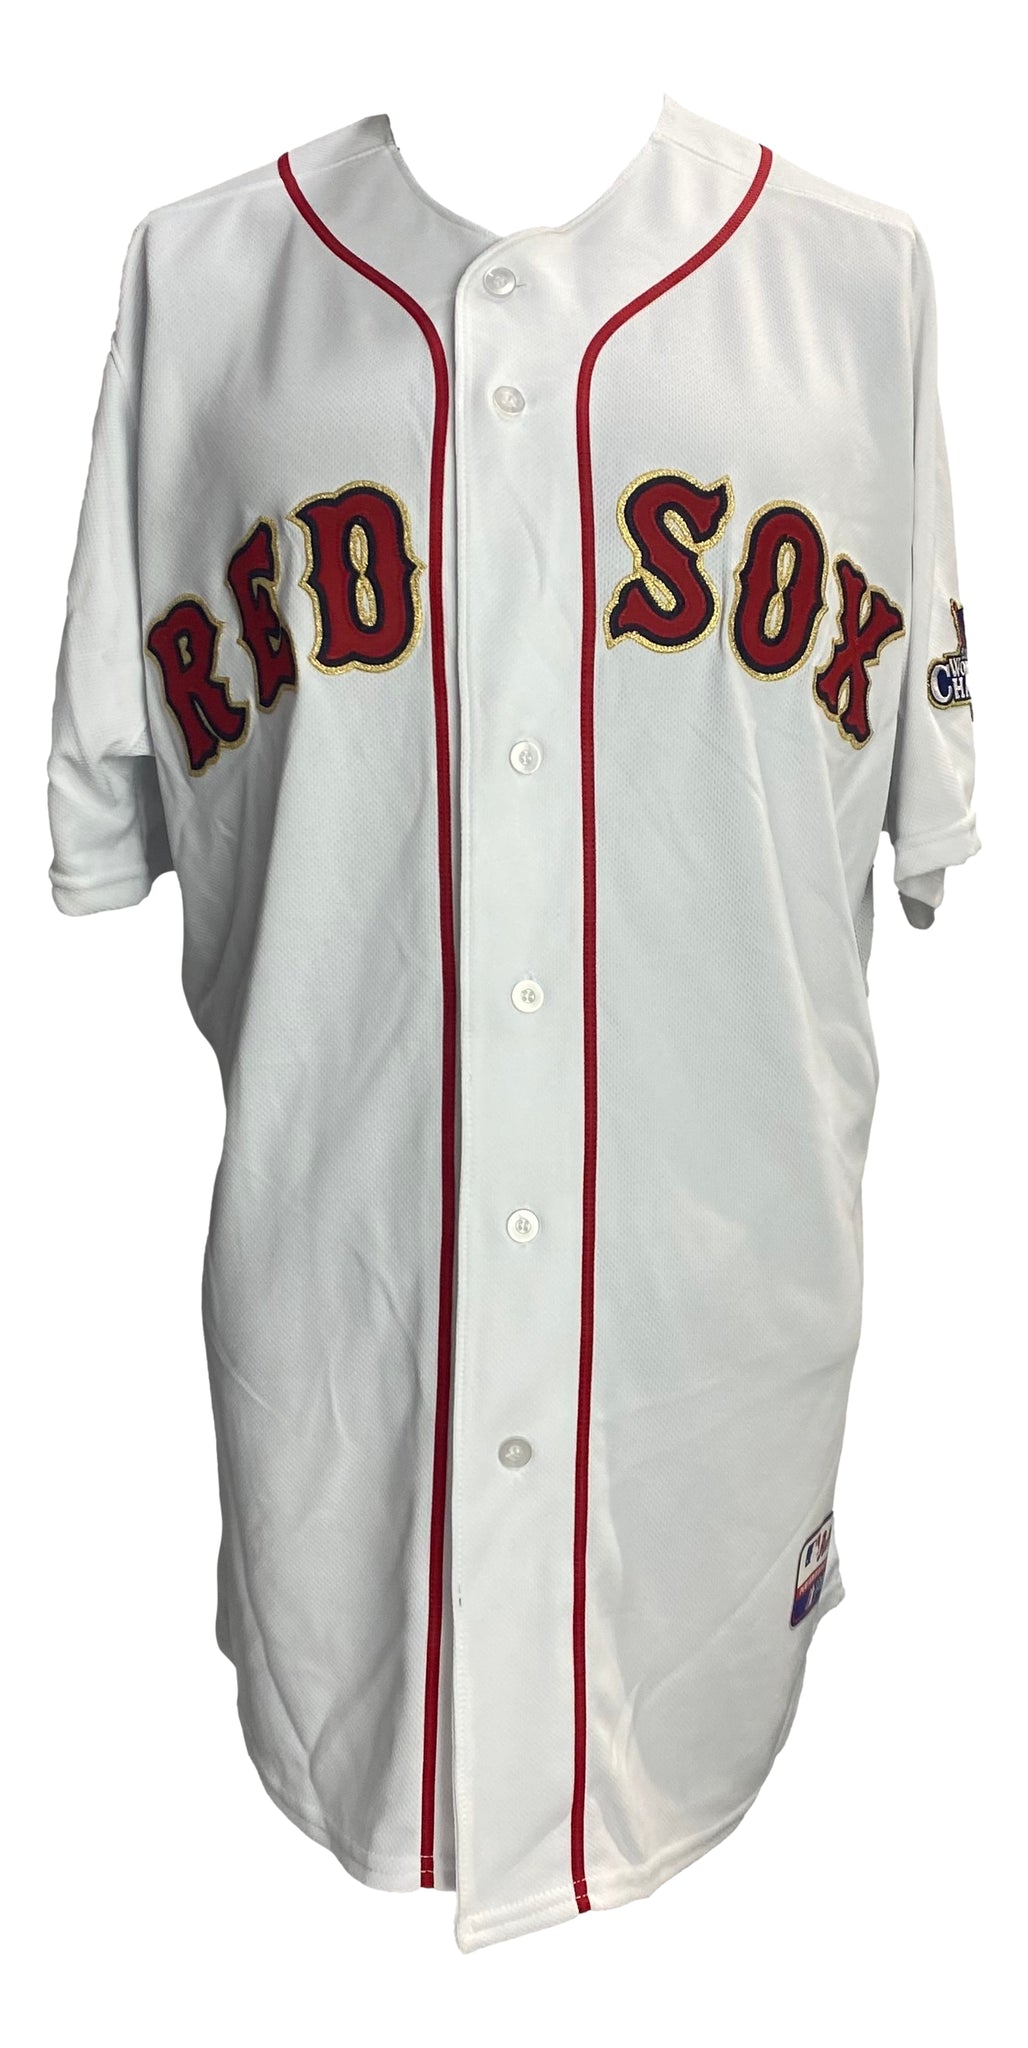 David Ortiz Signed Red Sox Majestic Authentic 2013 World Series Jersey –  Sports Integrity